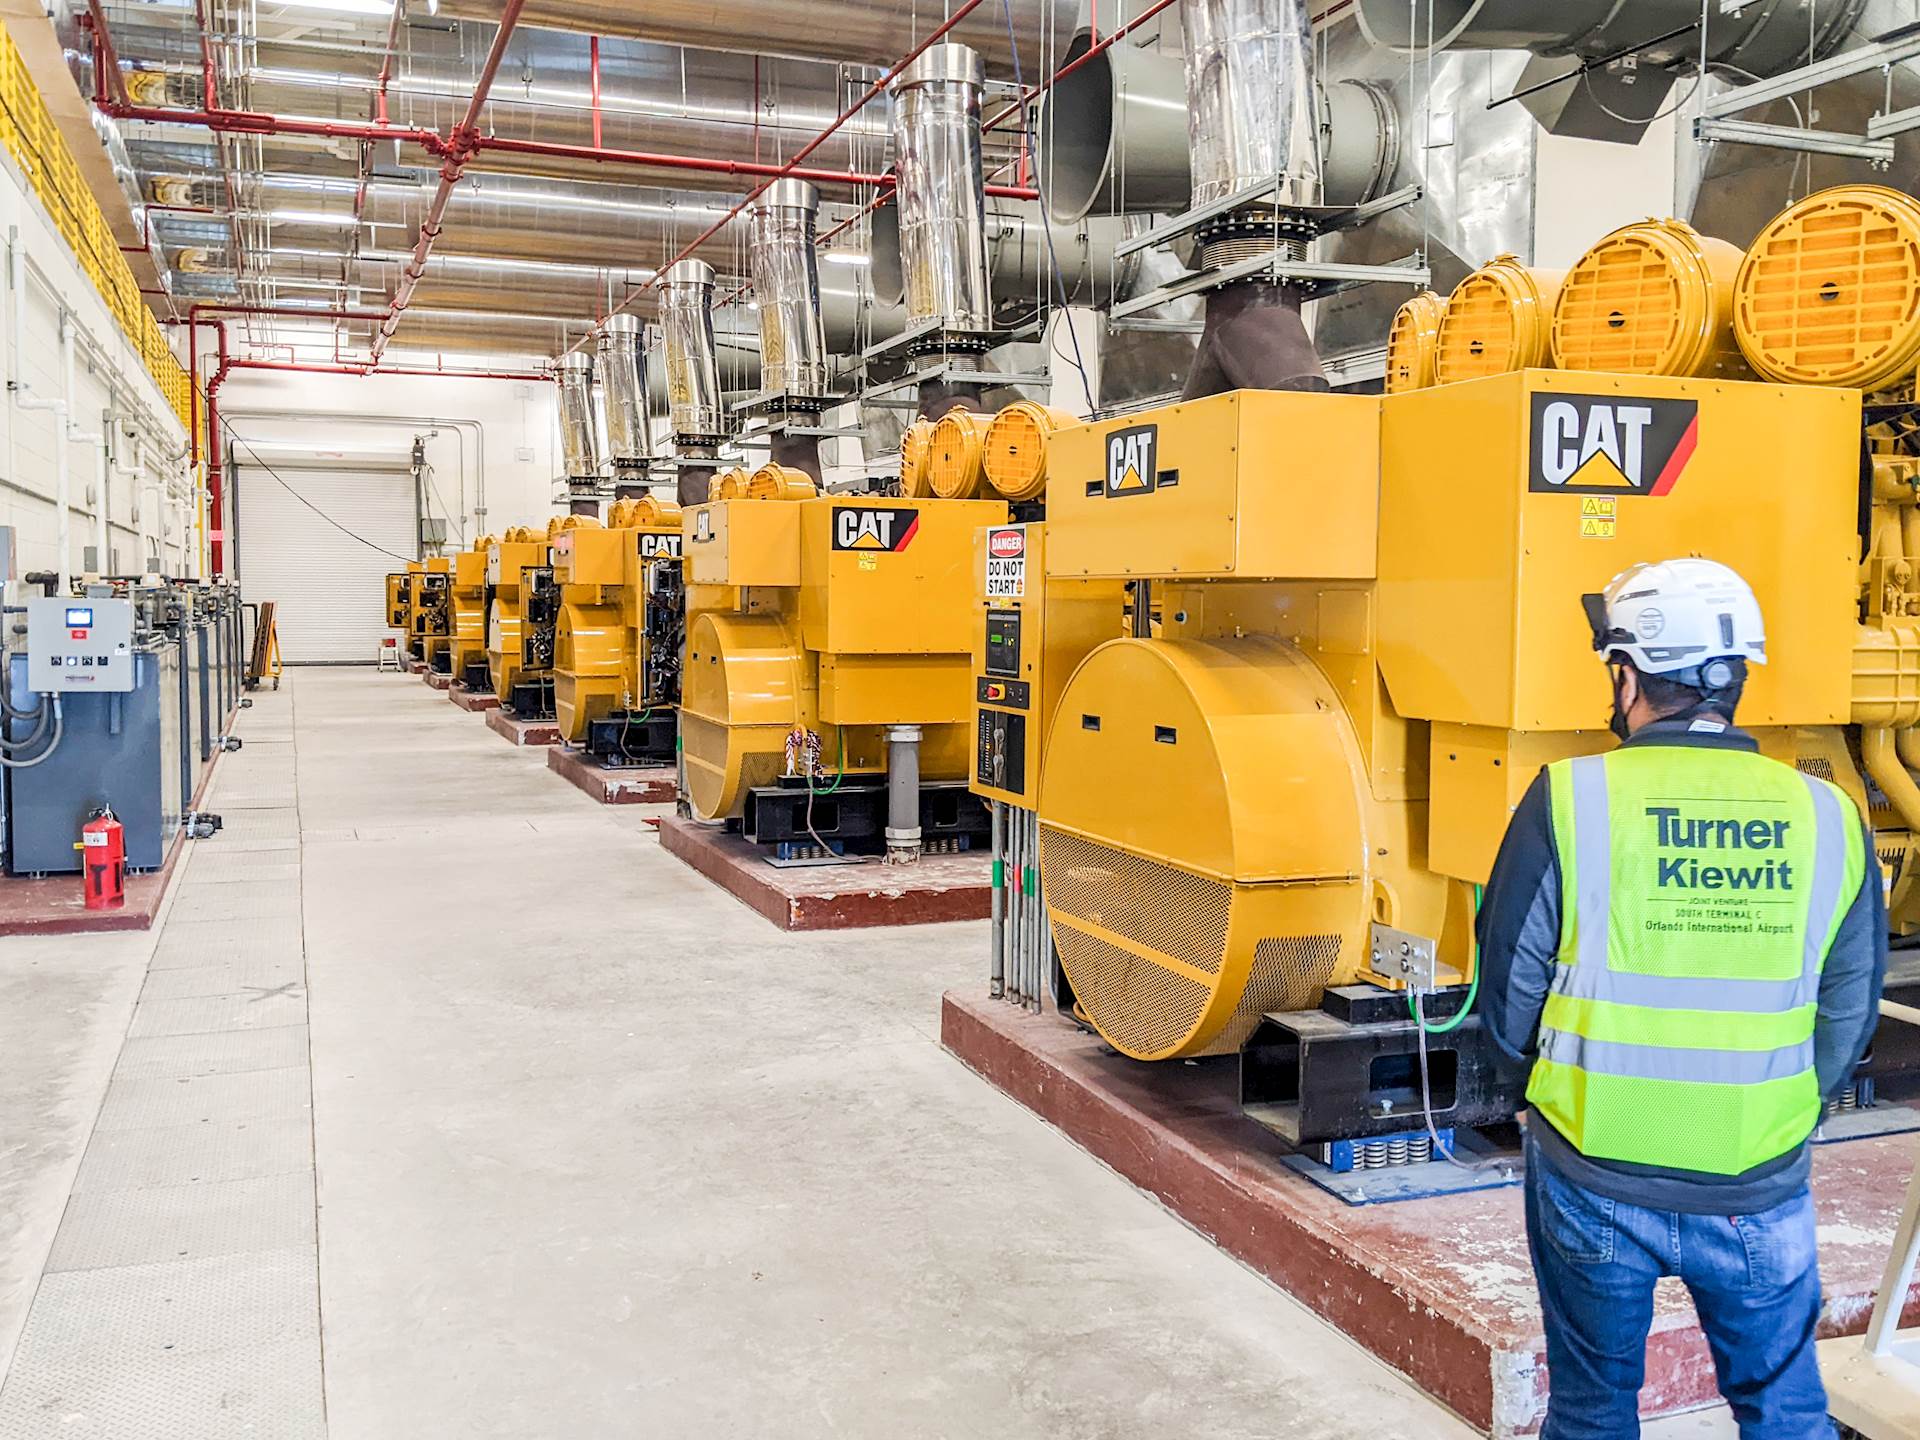 A person in a hard hat and safety vest stands in front of a row of several large generators inside a large mechanical area